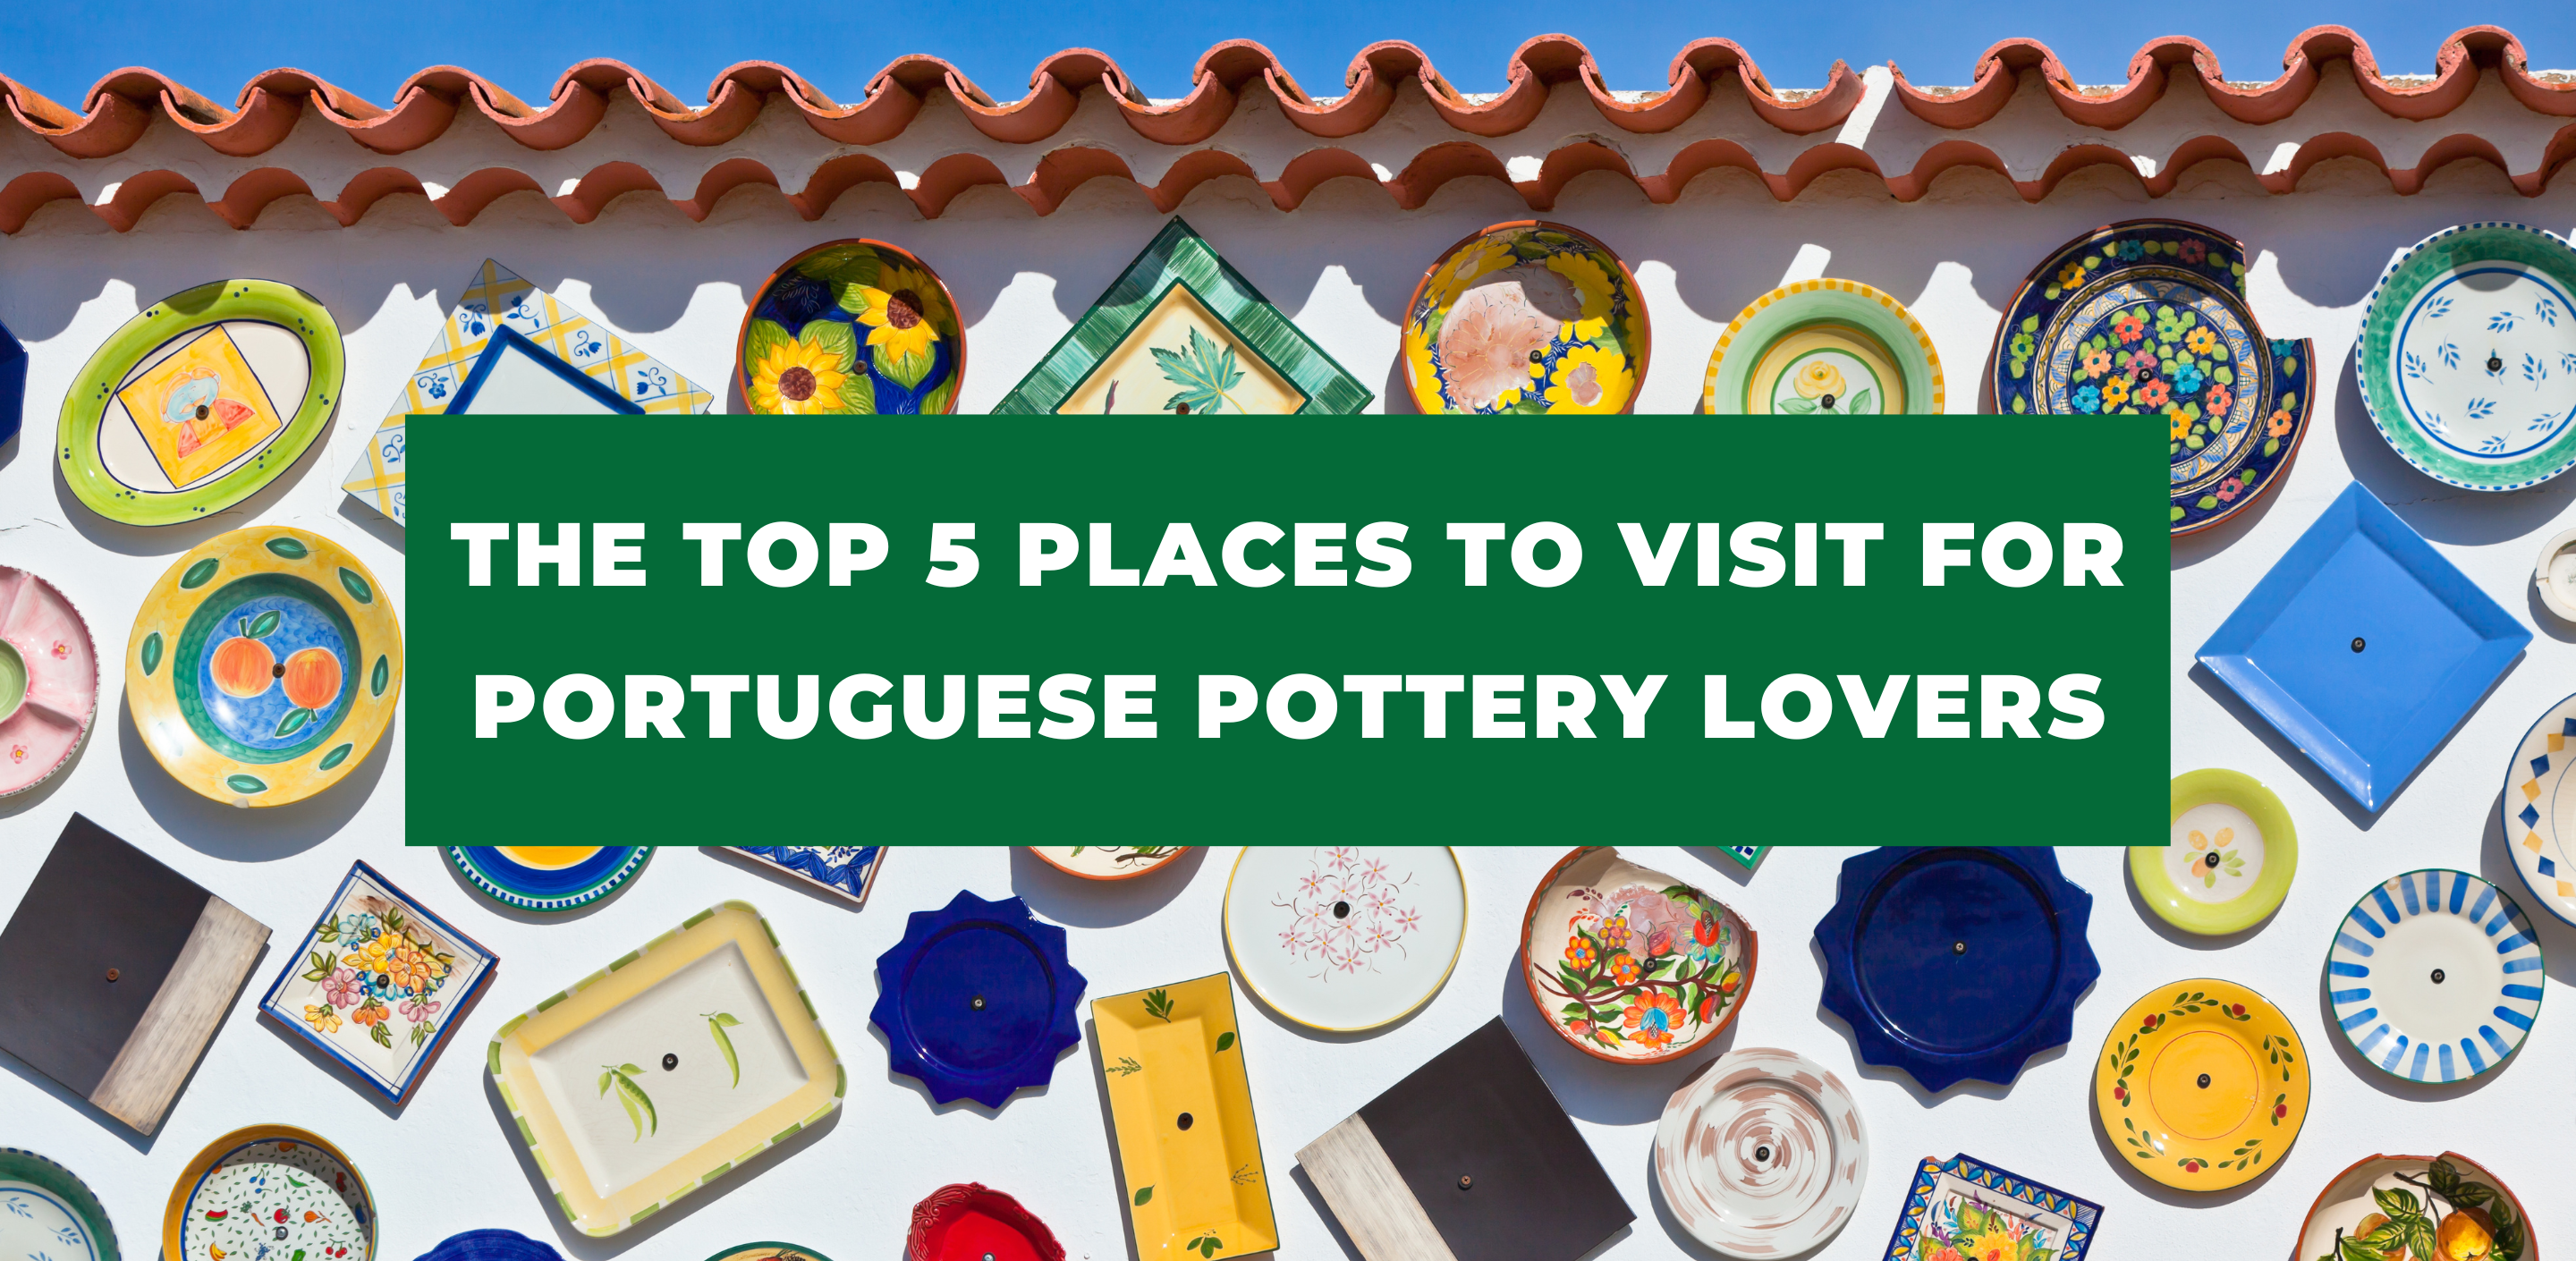 The Top 5 Places to Visit for Portuguese Pottery Lovers